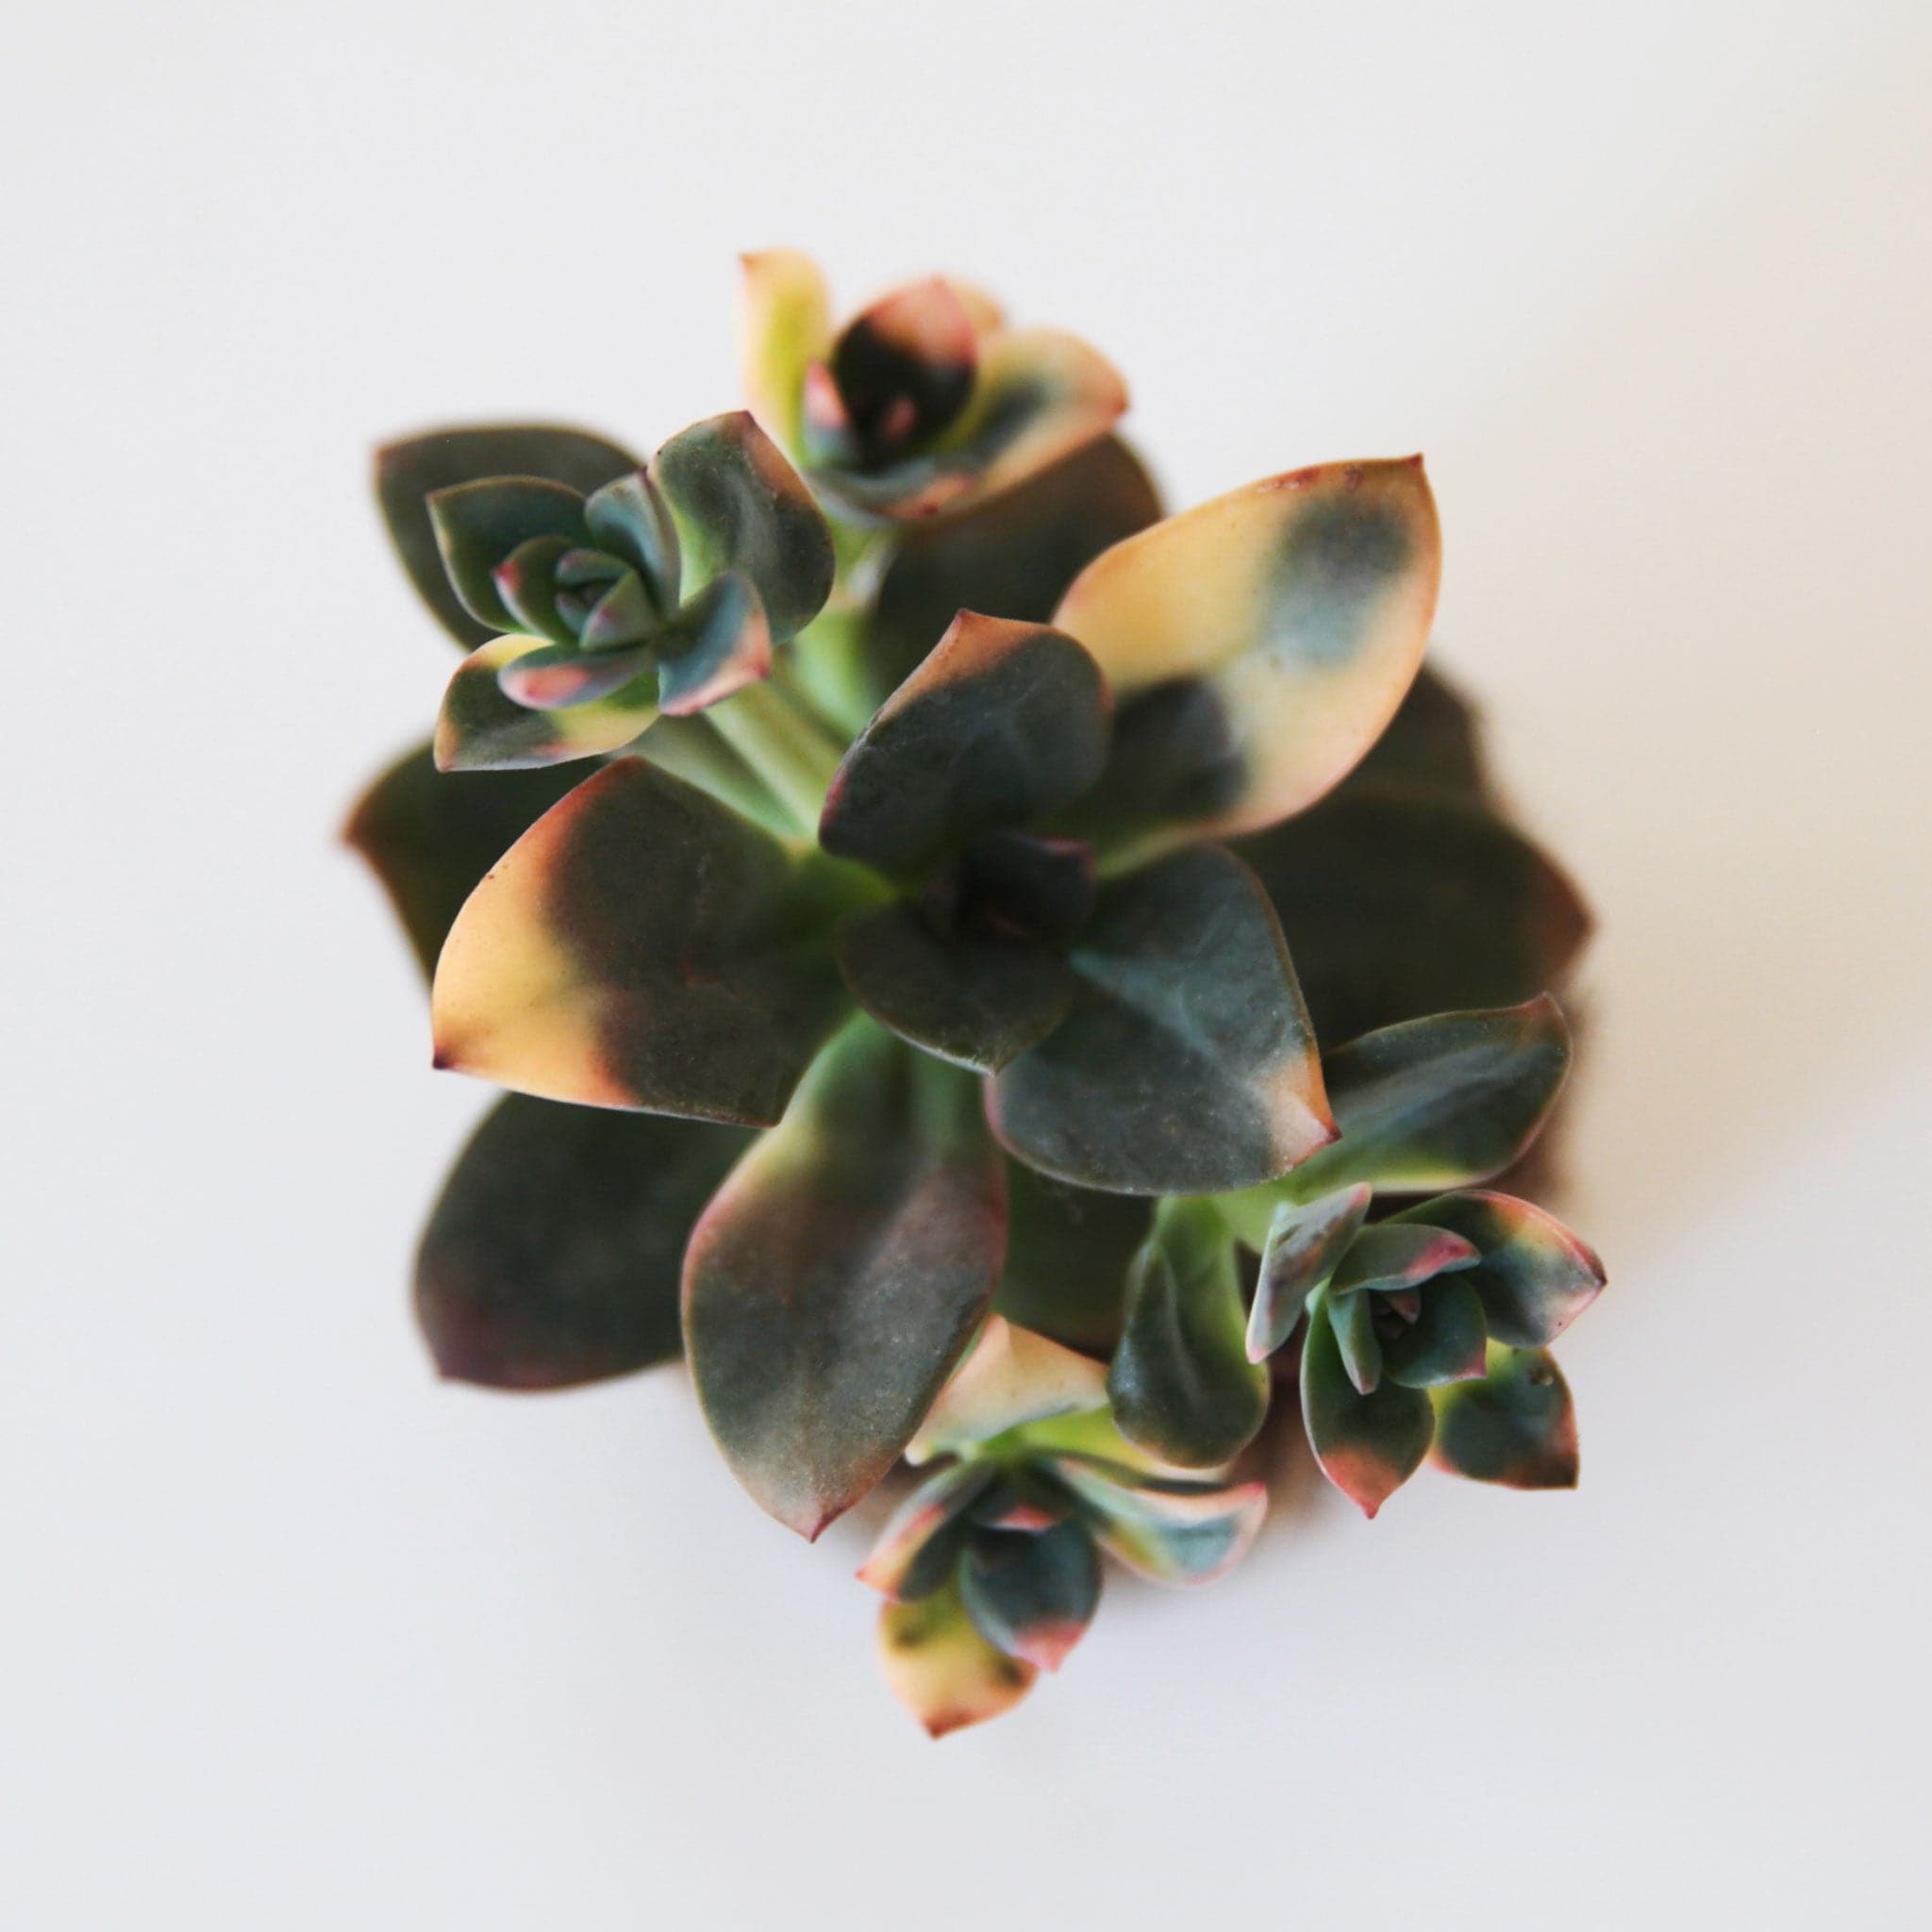 On a white background is a Echeveria Chroma succulent with multi colored leaves. Each succulent varies in shape and color.